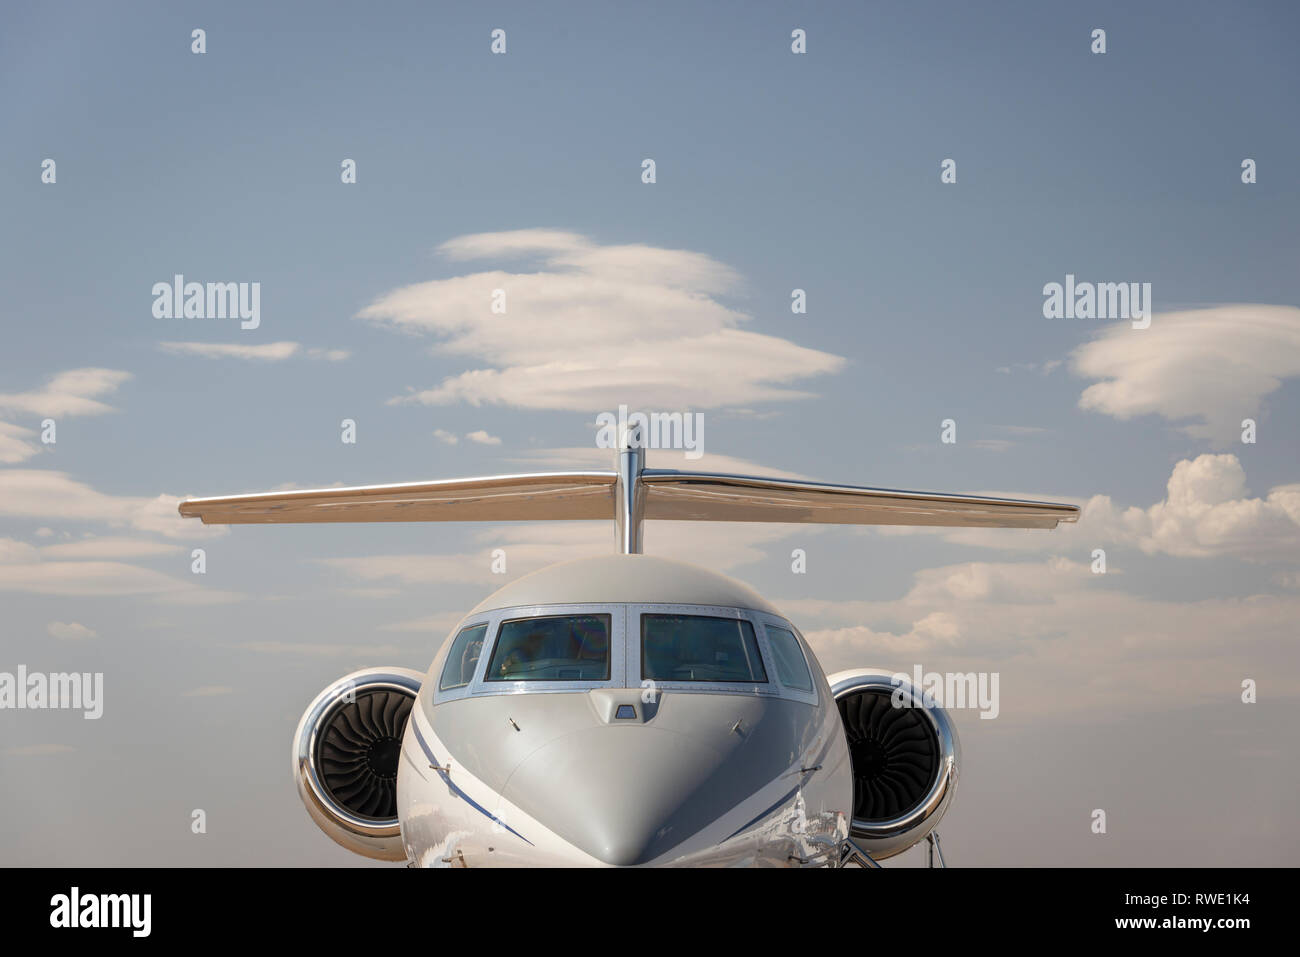 A personal luxury jet aircraft against a blue sky with cloud Stock Photo